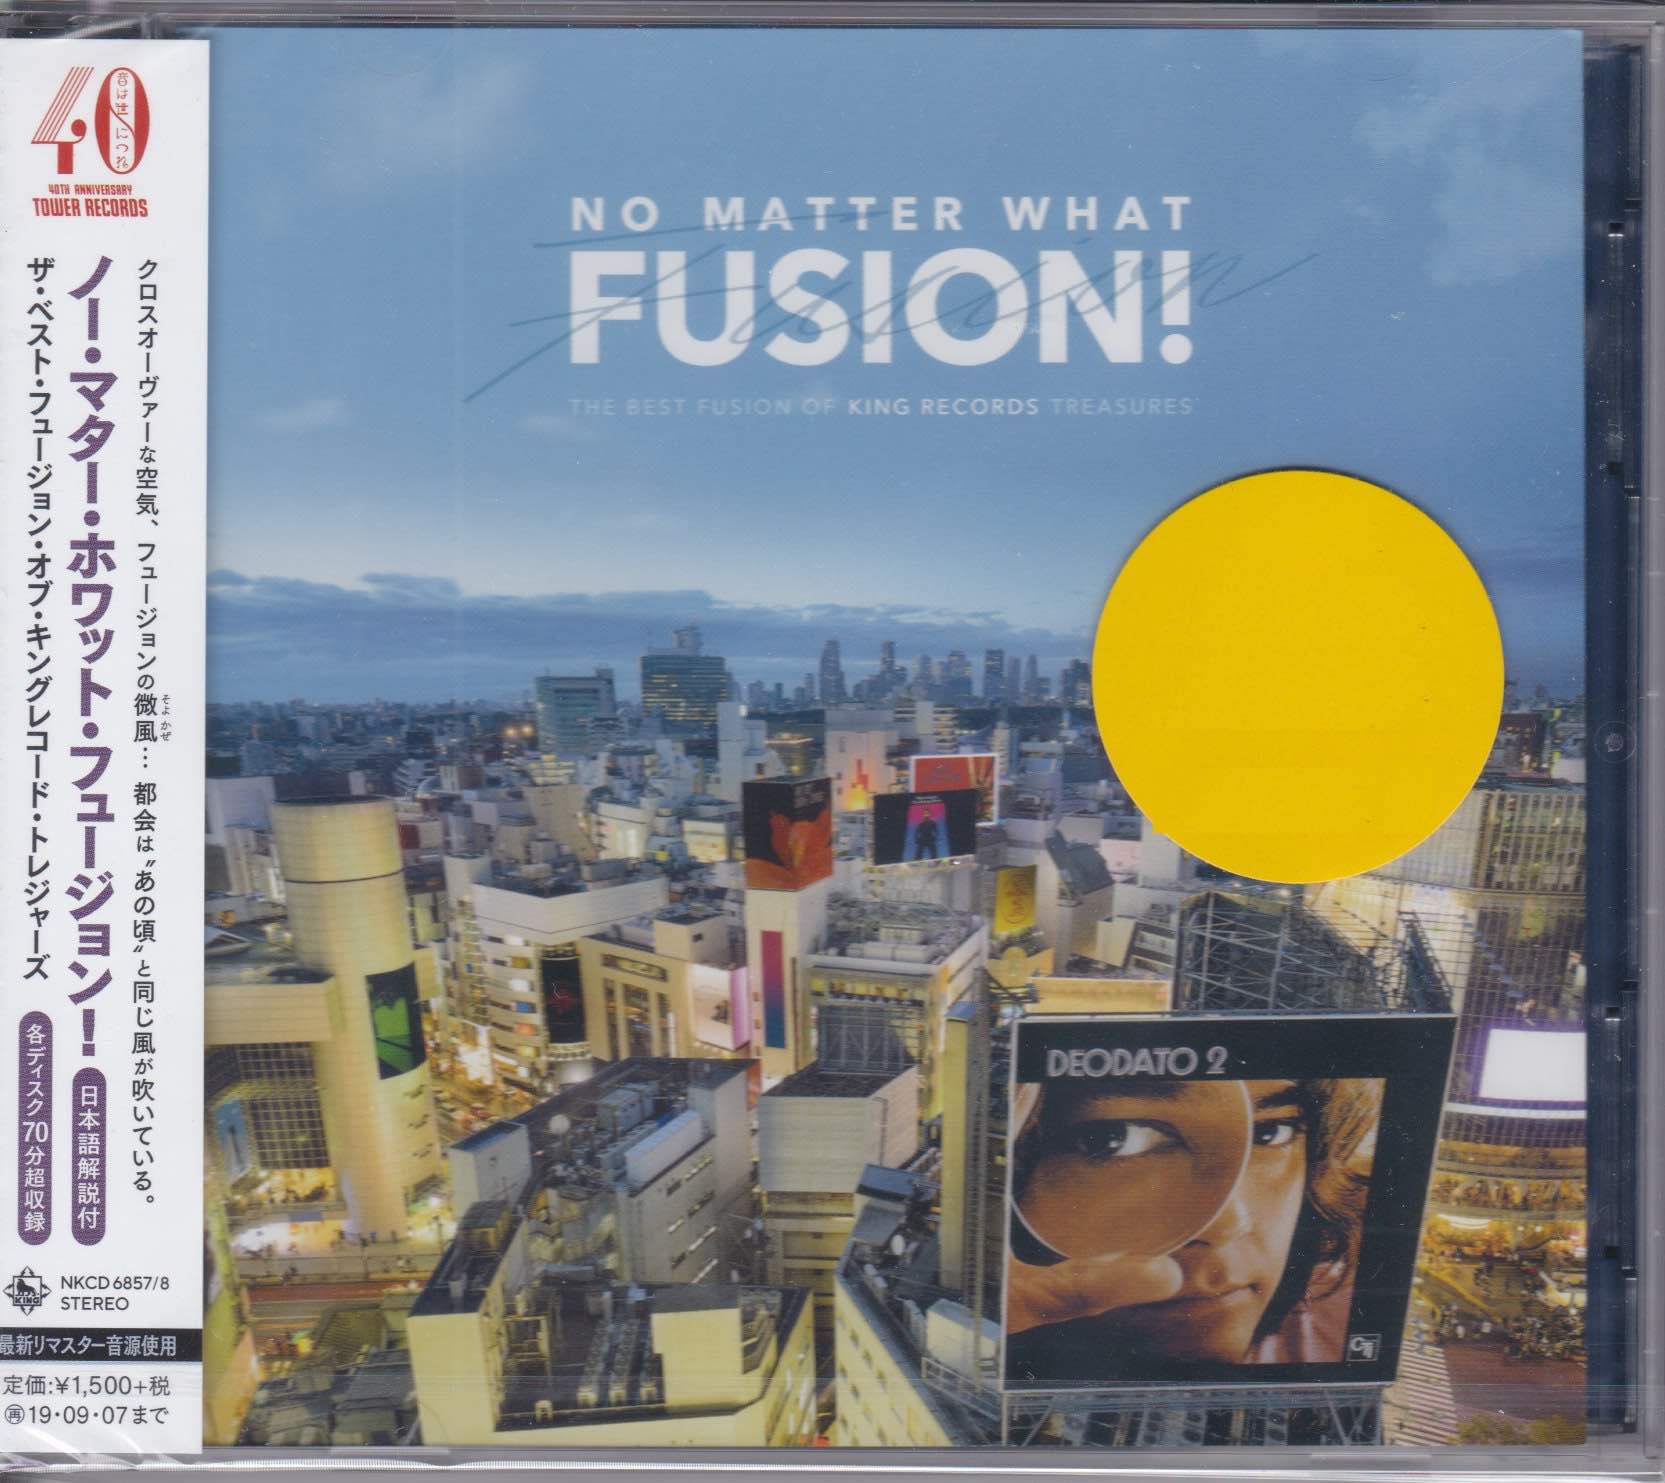 Various Artists - NO MATTER WHAT FUSION! The Best Fusion of KING RECORDS Treasures